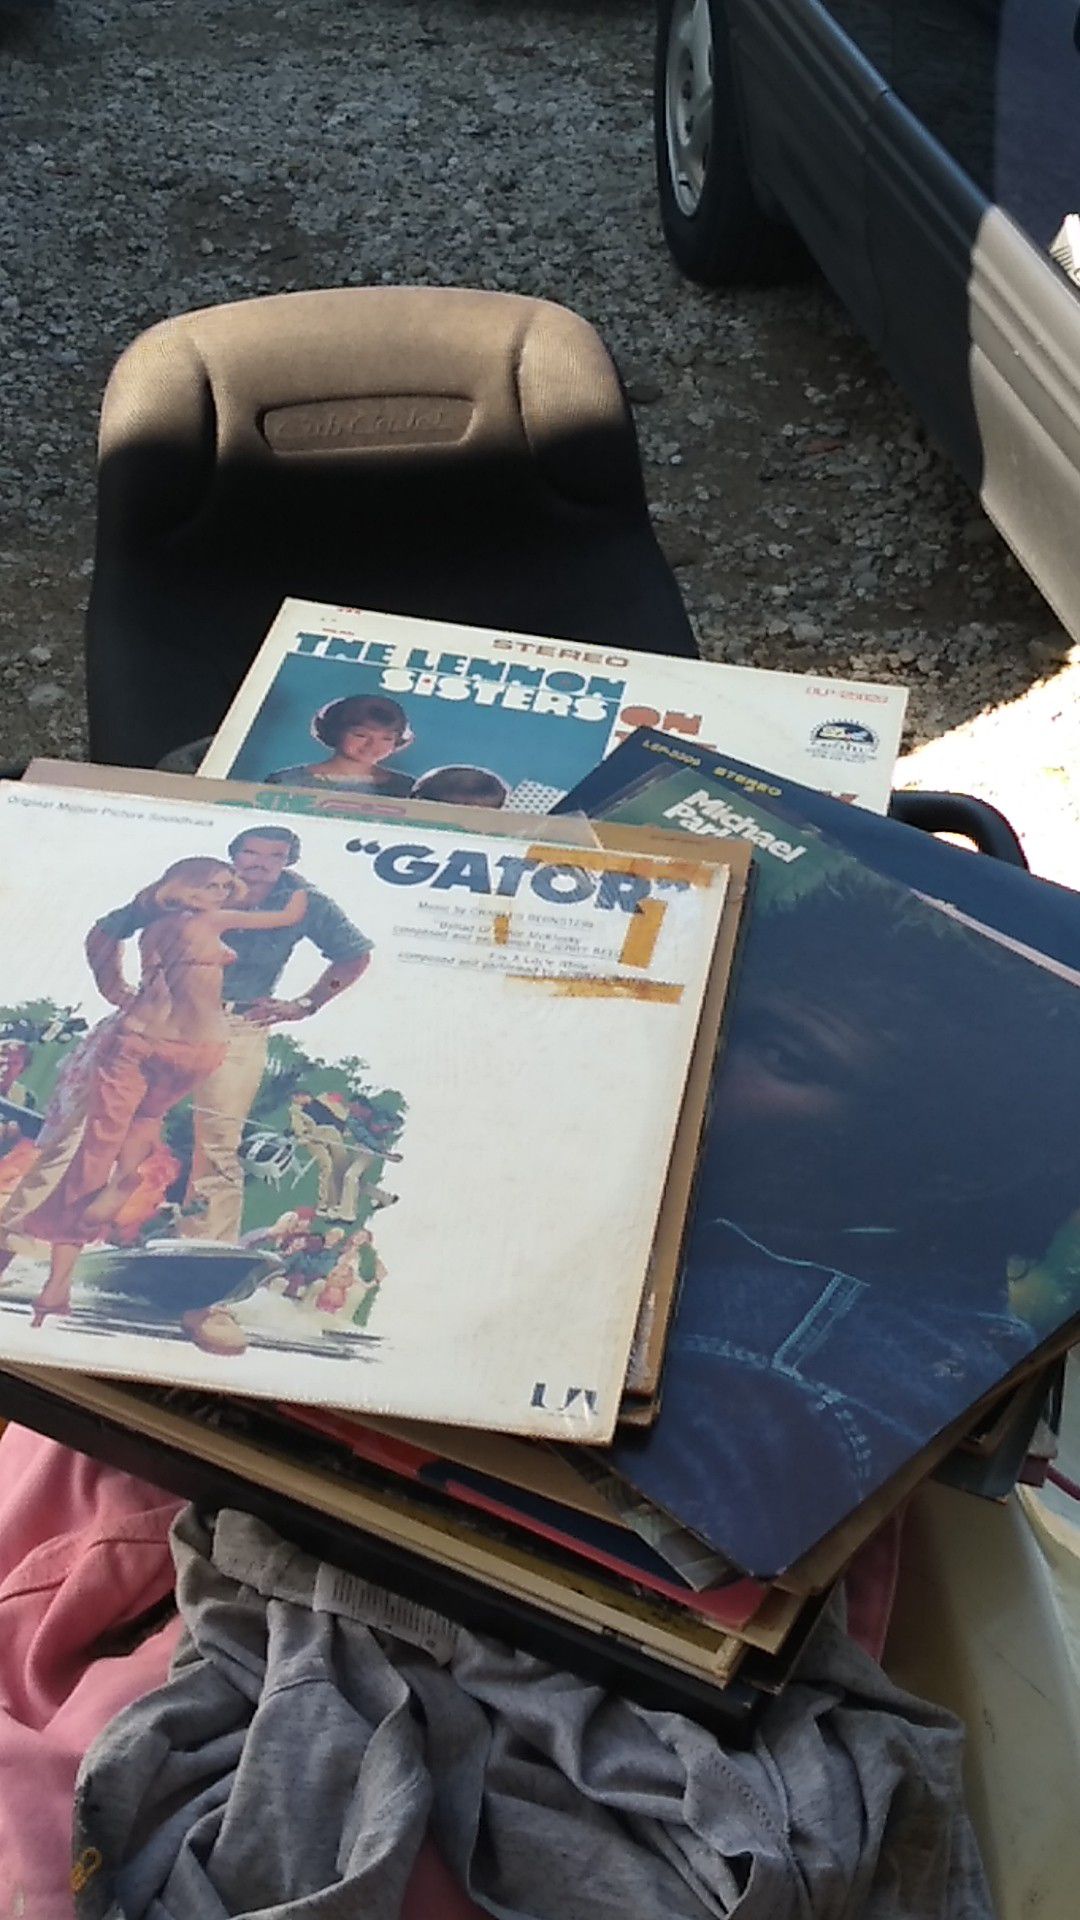 Old vinyl records $10 for the stack must be twenty or thirty of them there